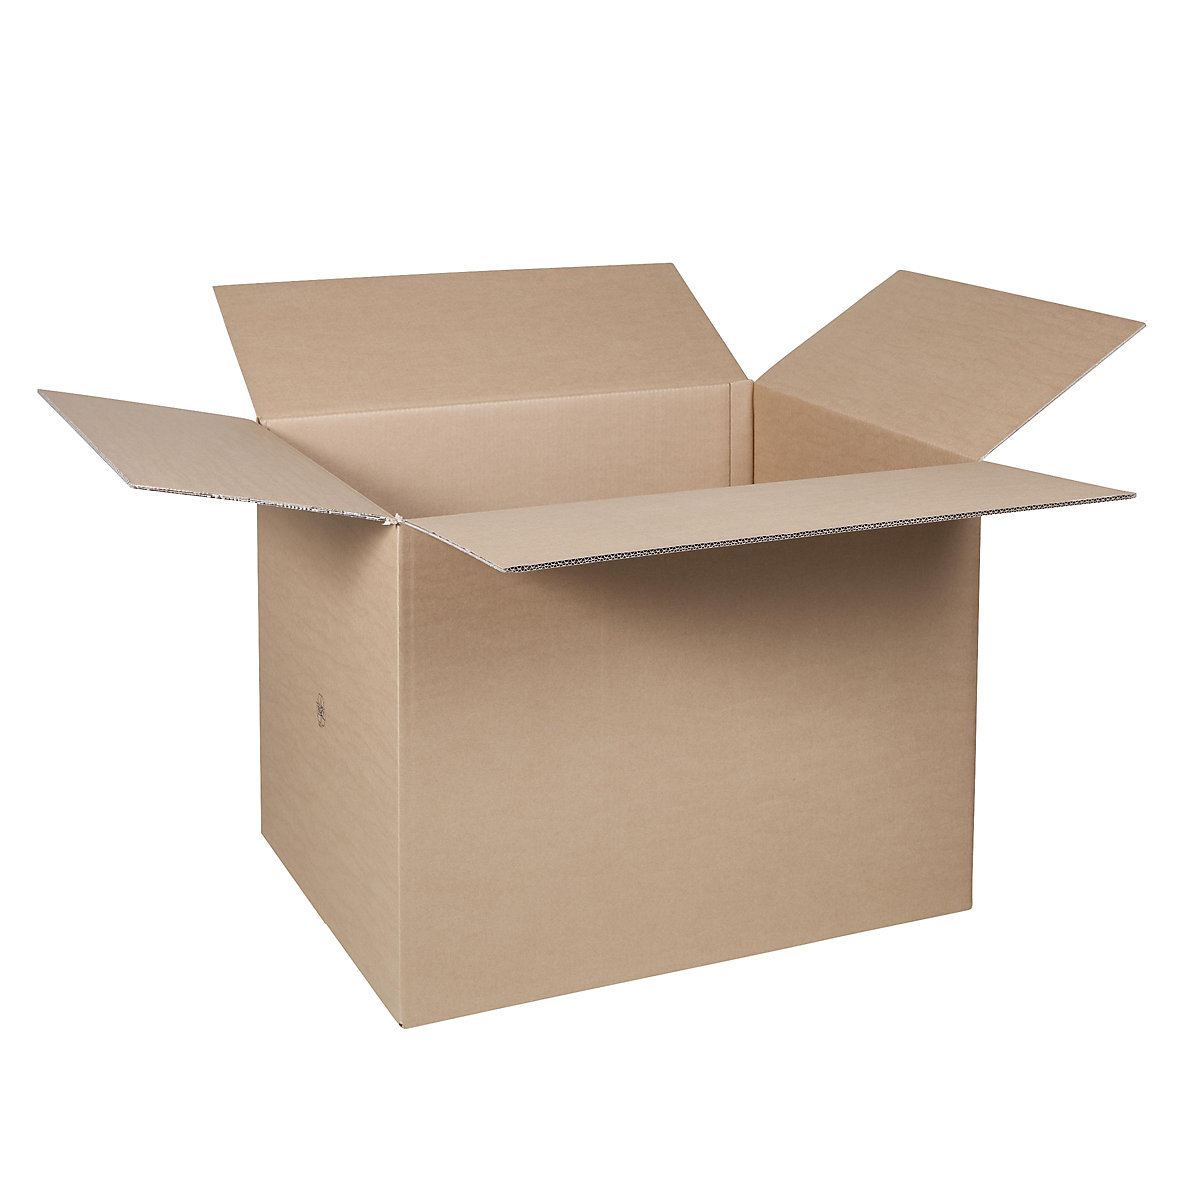 Folding cardboard box, FEFCO 0201, made of double fluted cardboard, internal dimensions 325 x 220 x 160 mm, pack of 100-38